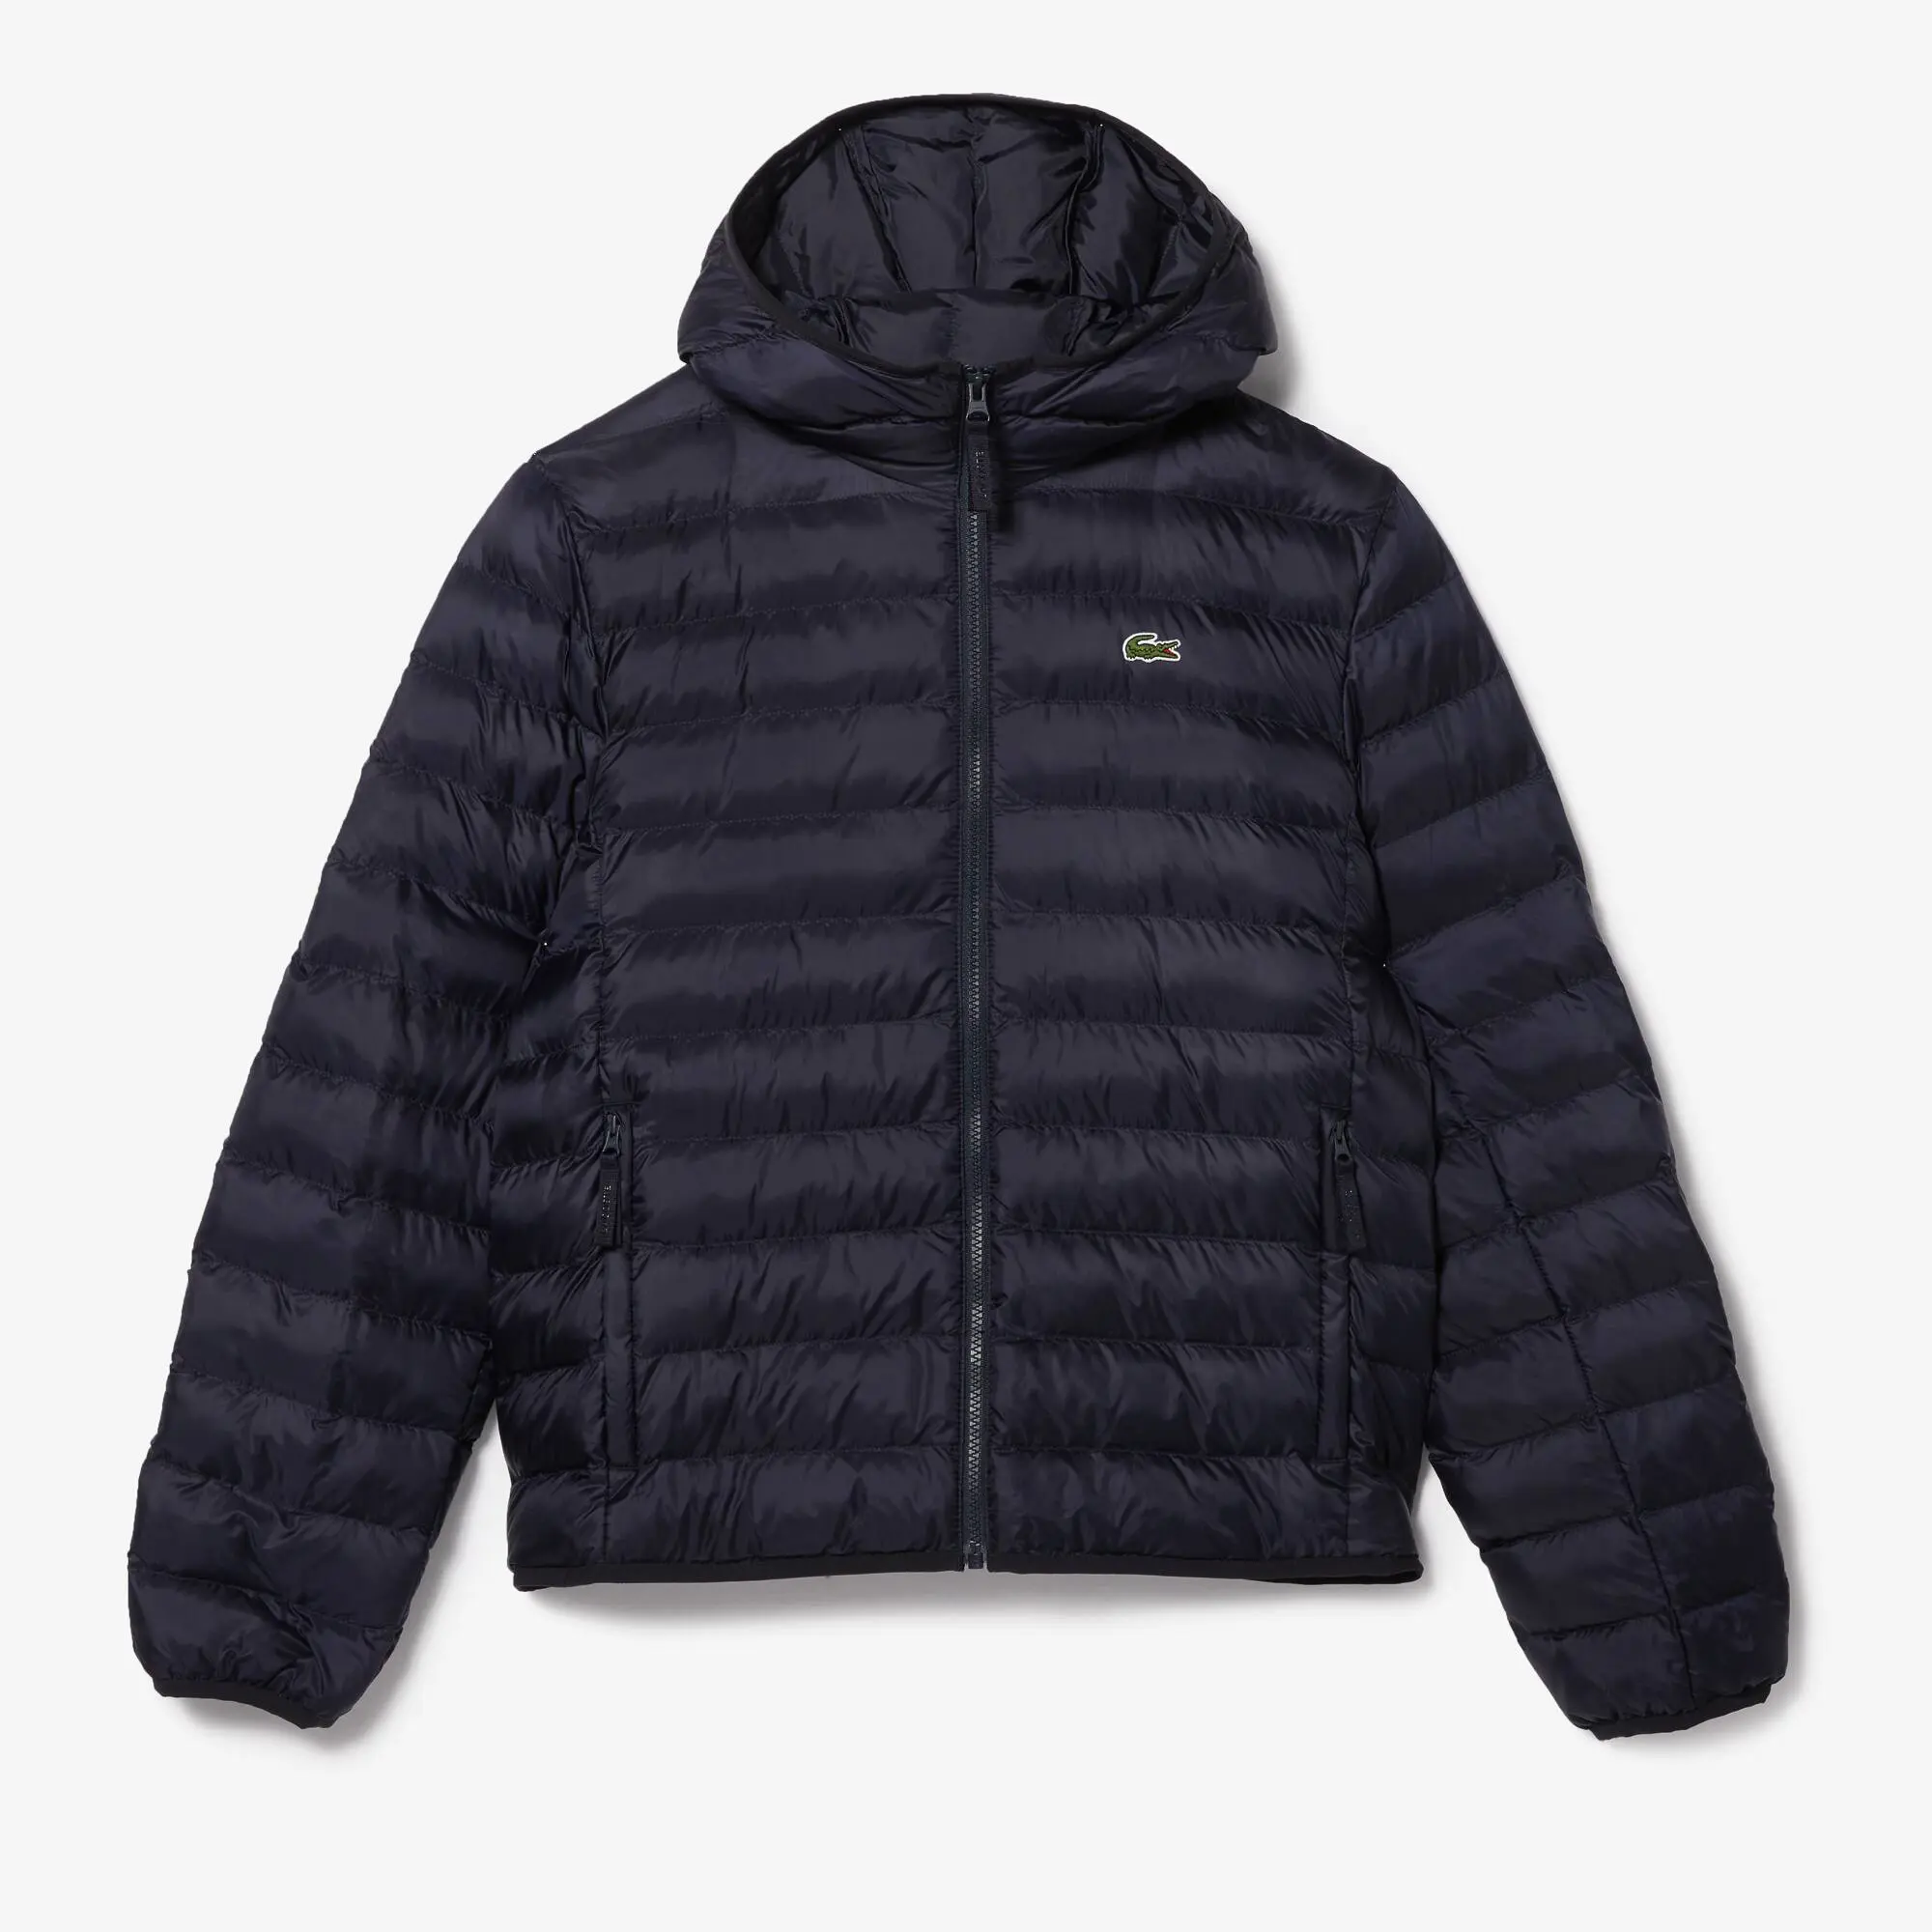 Lacoste Men's Lacoste Quilted Hooded Short Jacket. 2